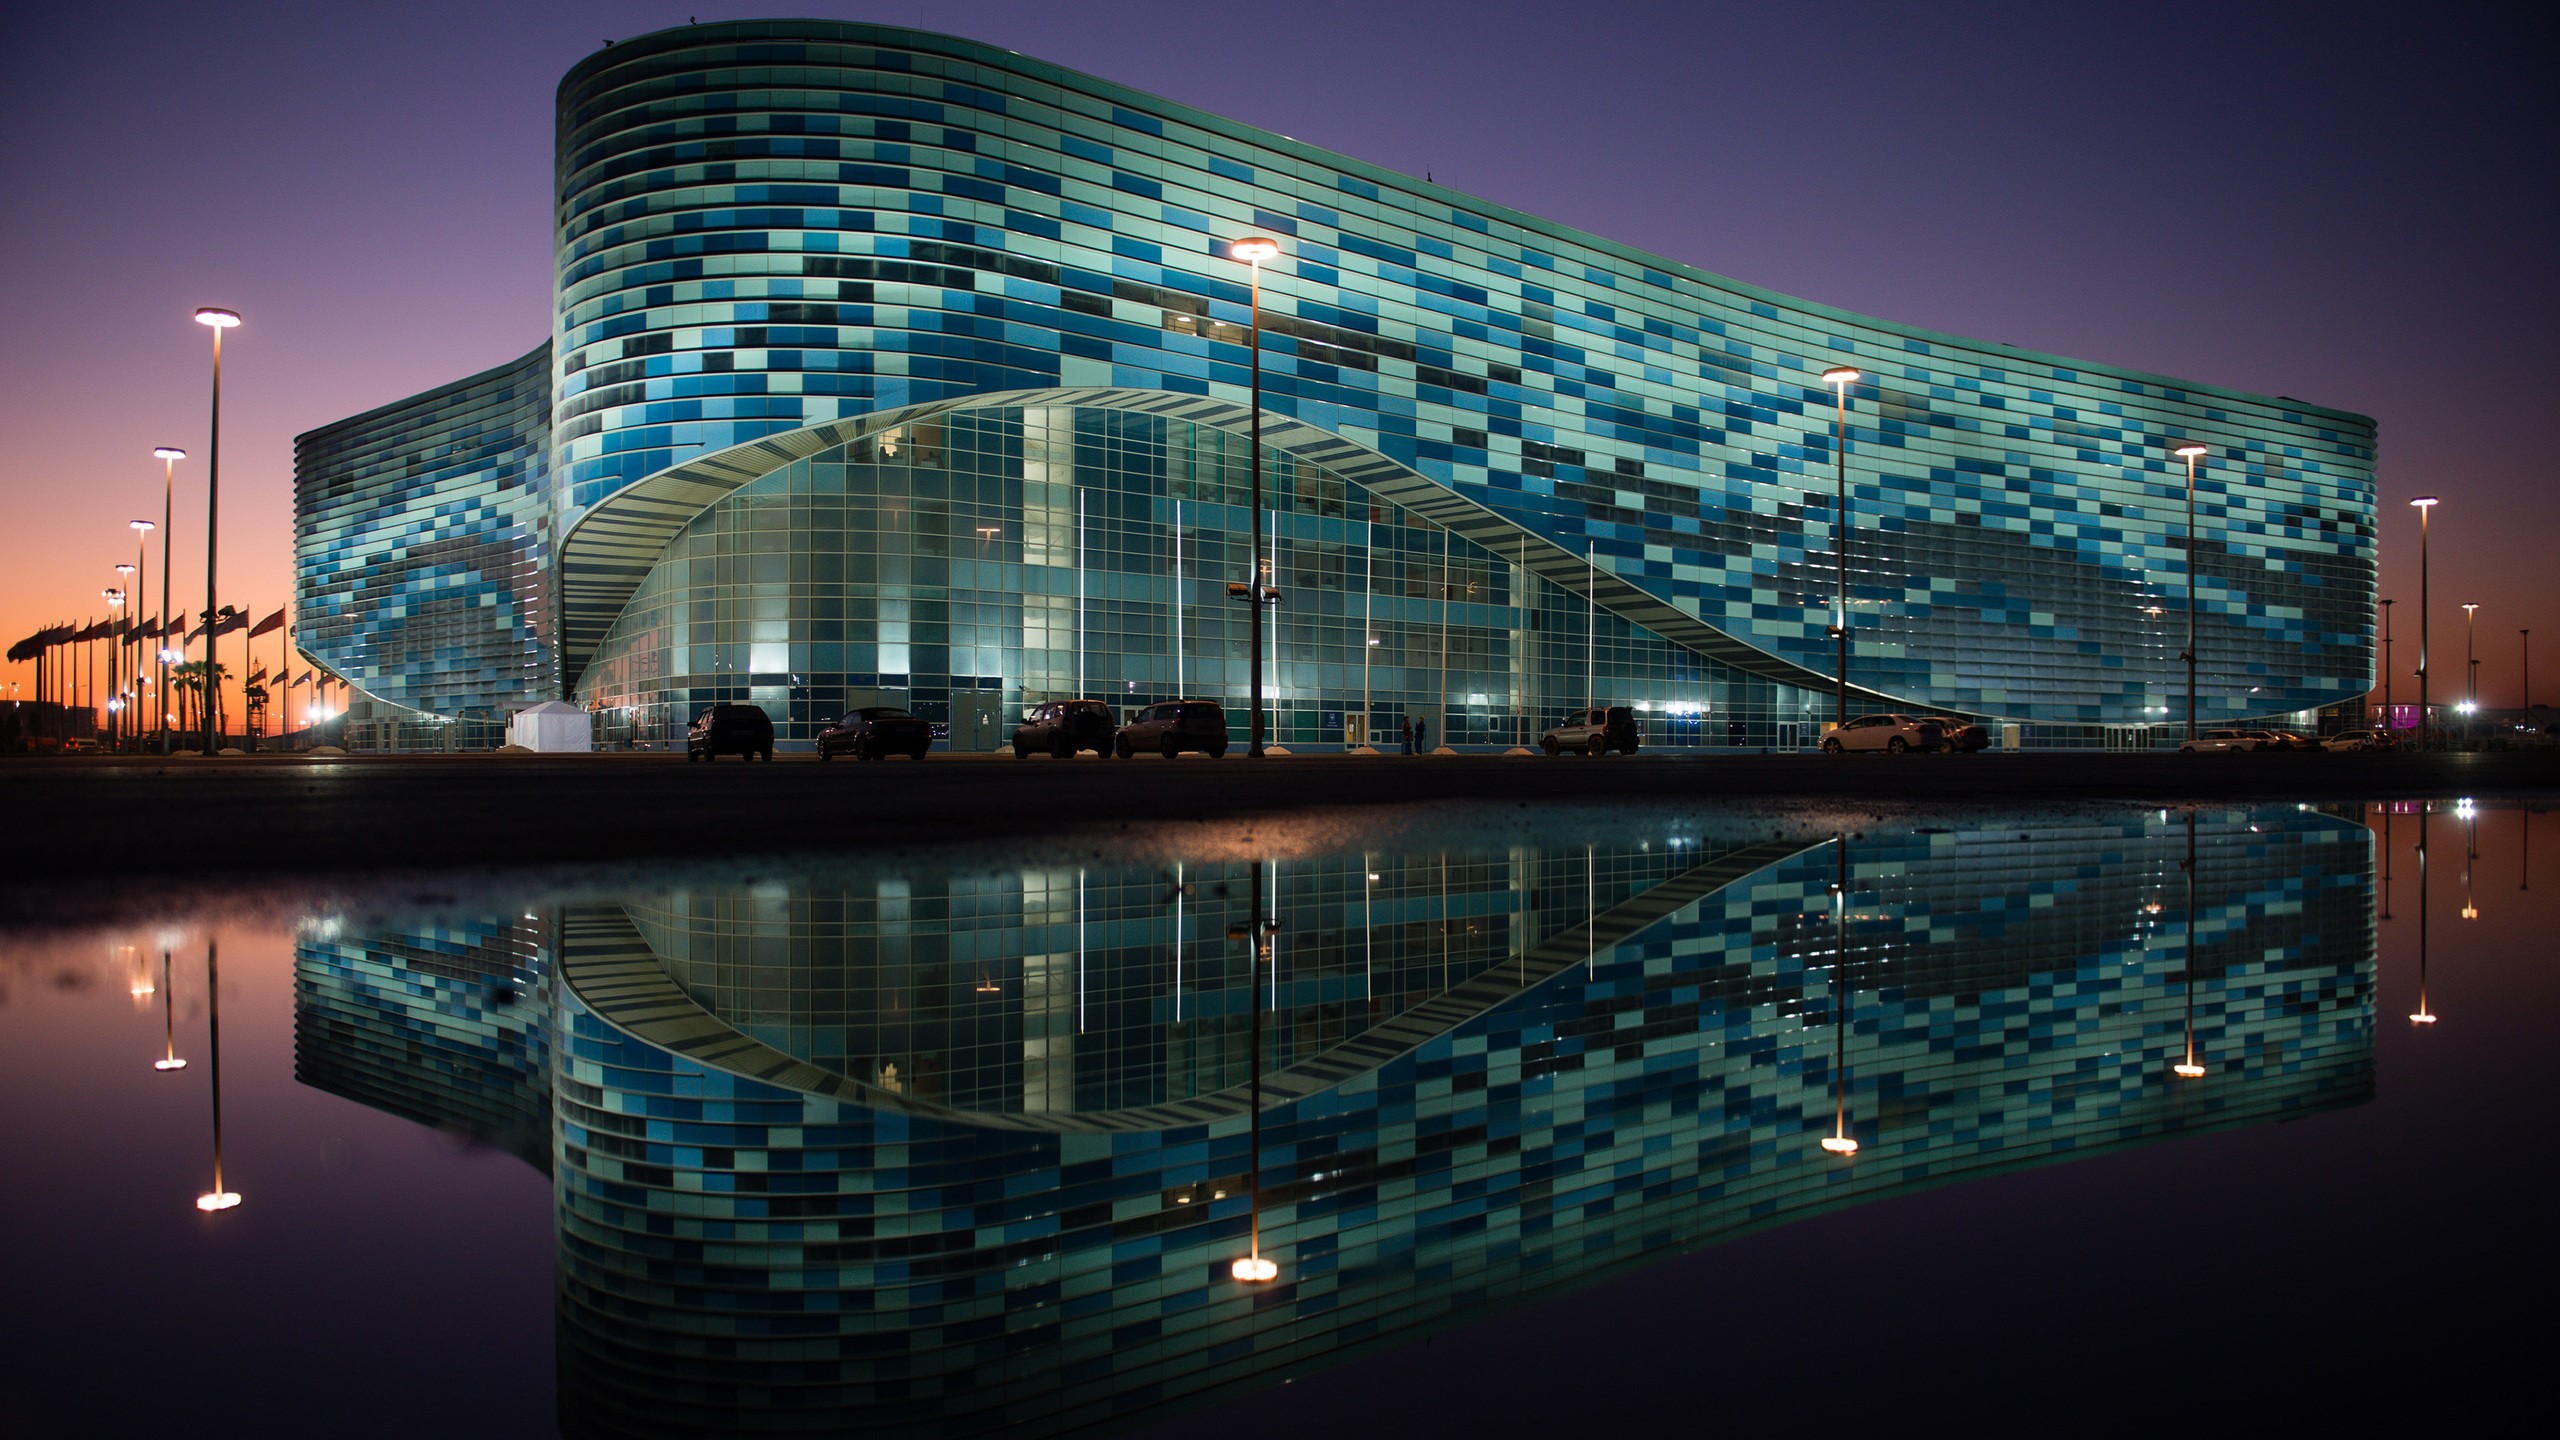 Architecture Building Modern Russia Sochi Olympic Games Glass Night Lights Water Car Reflection Stre 2560x1440